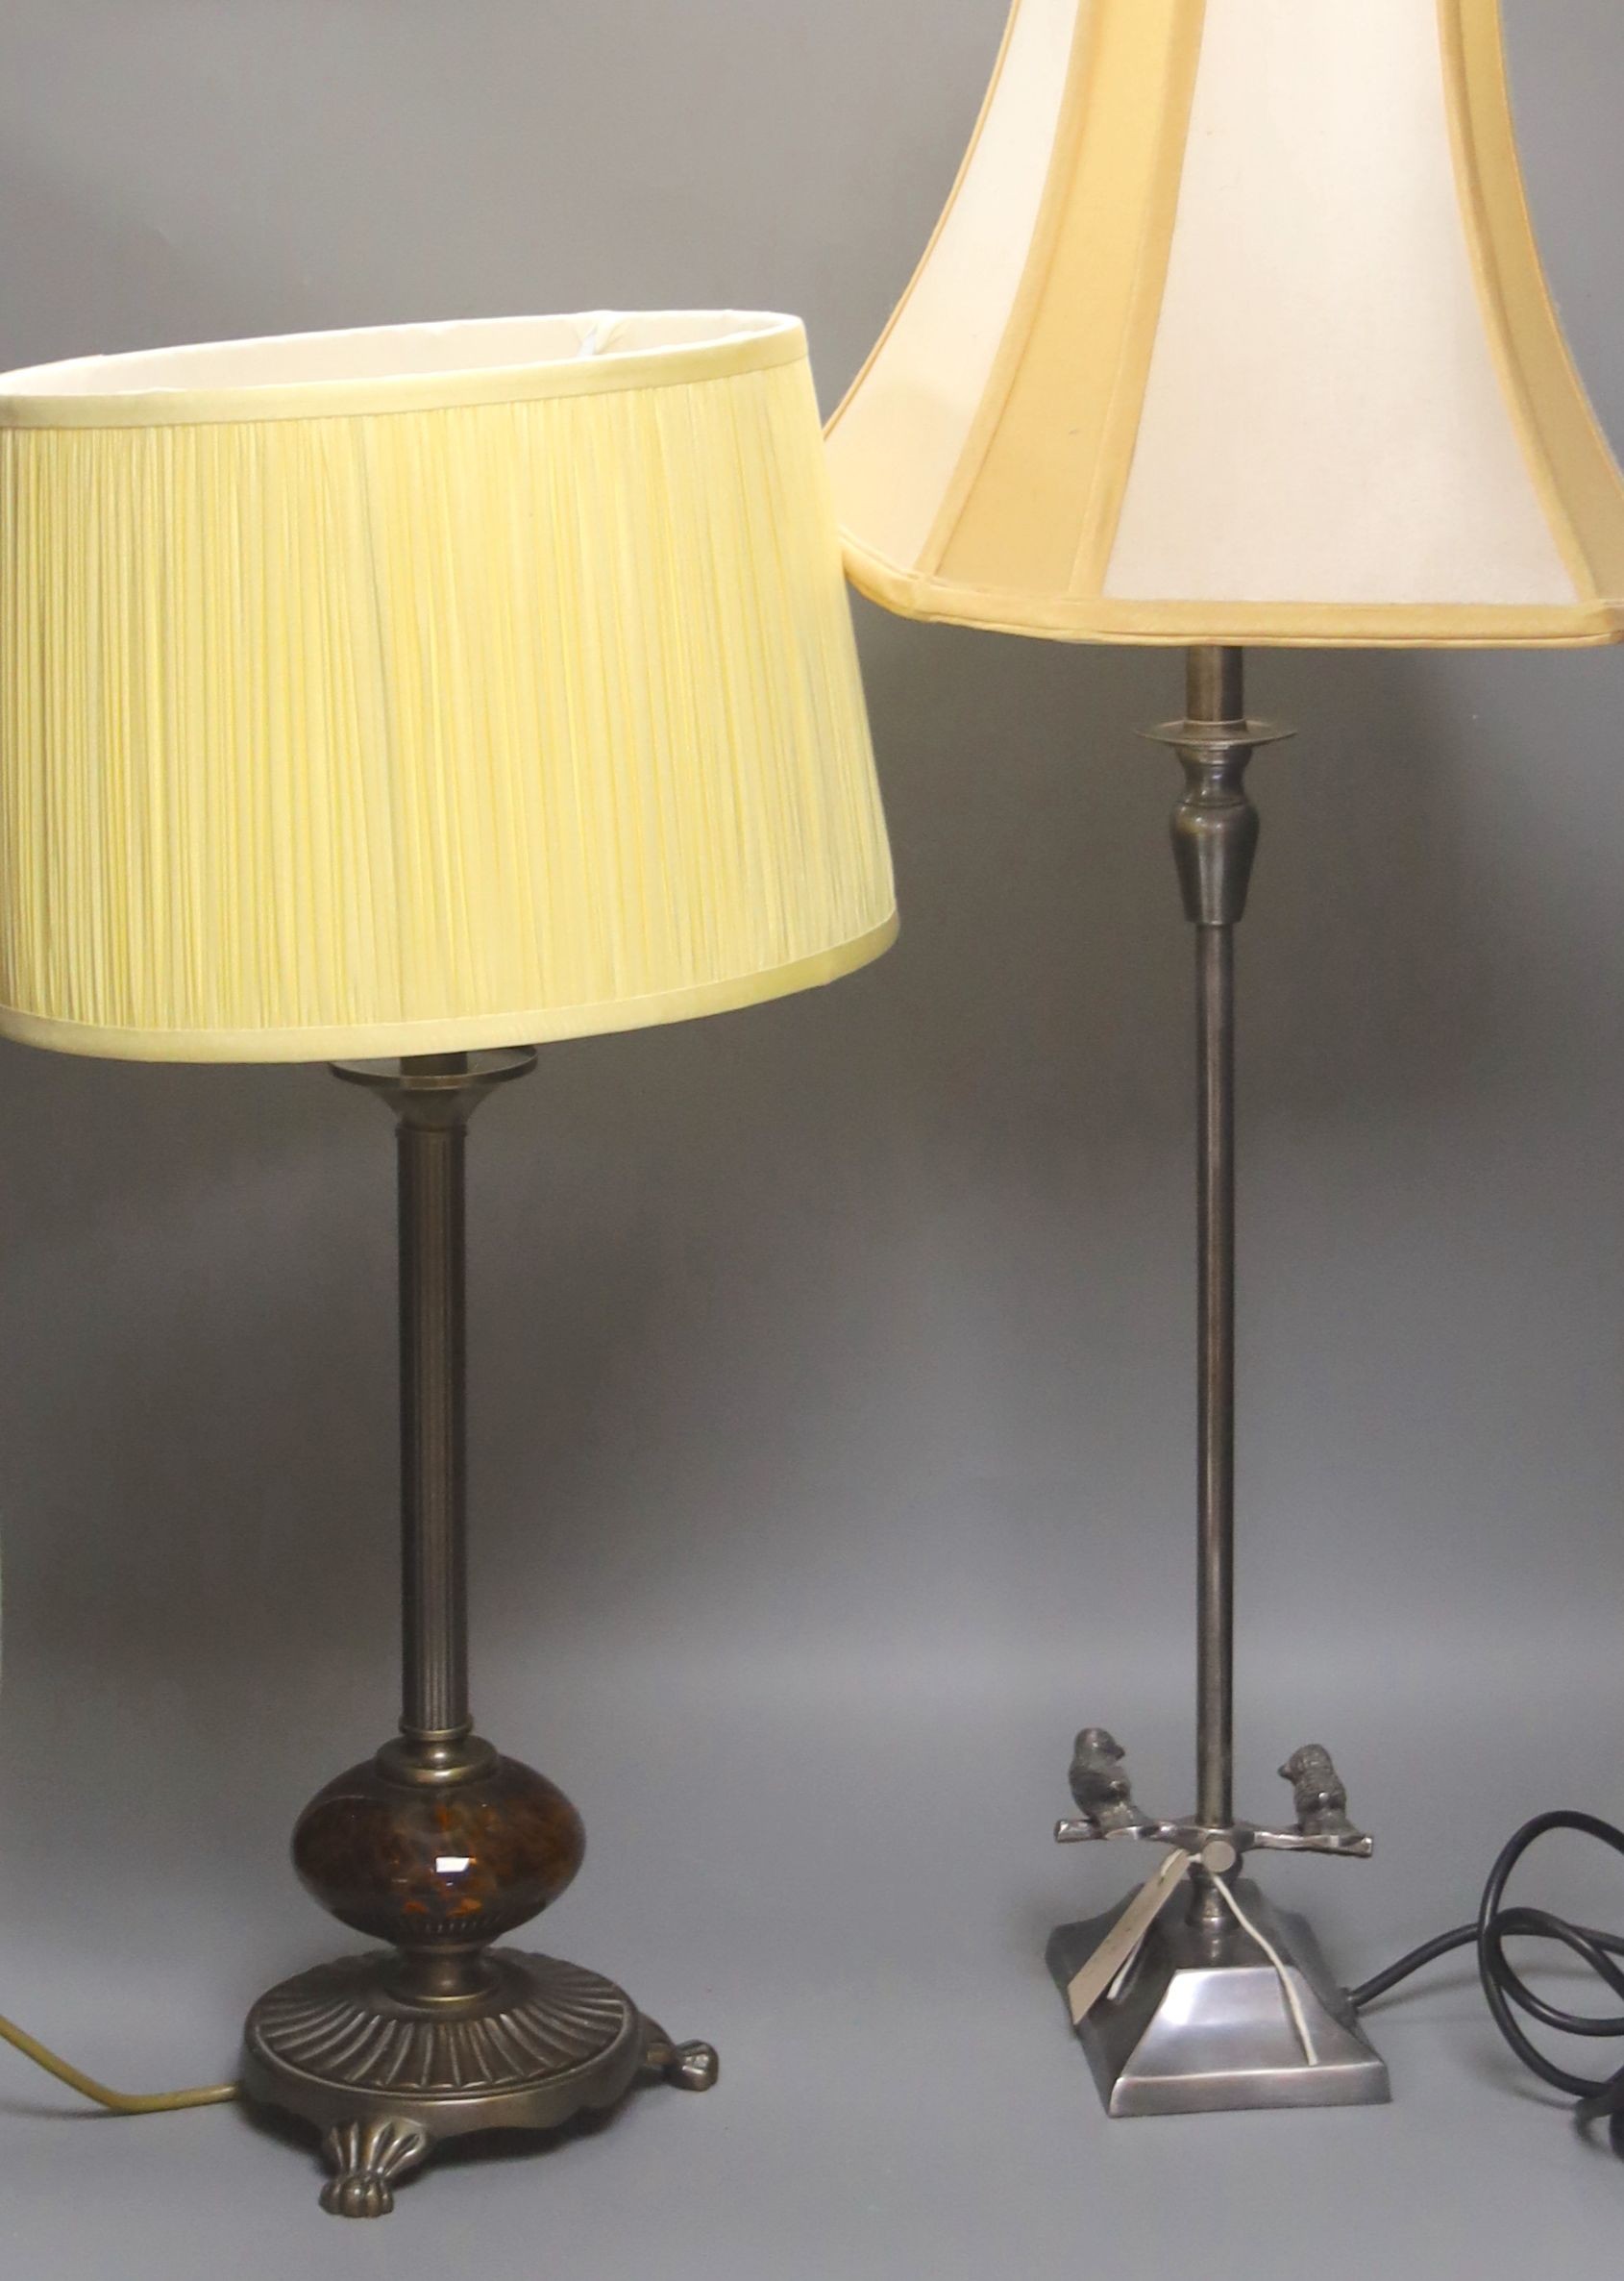 A bronze table lamp with mottled brown glass fitting and a chromed adjustable lamp